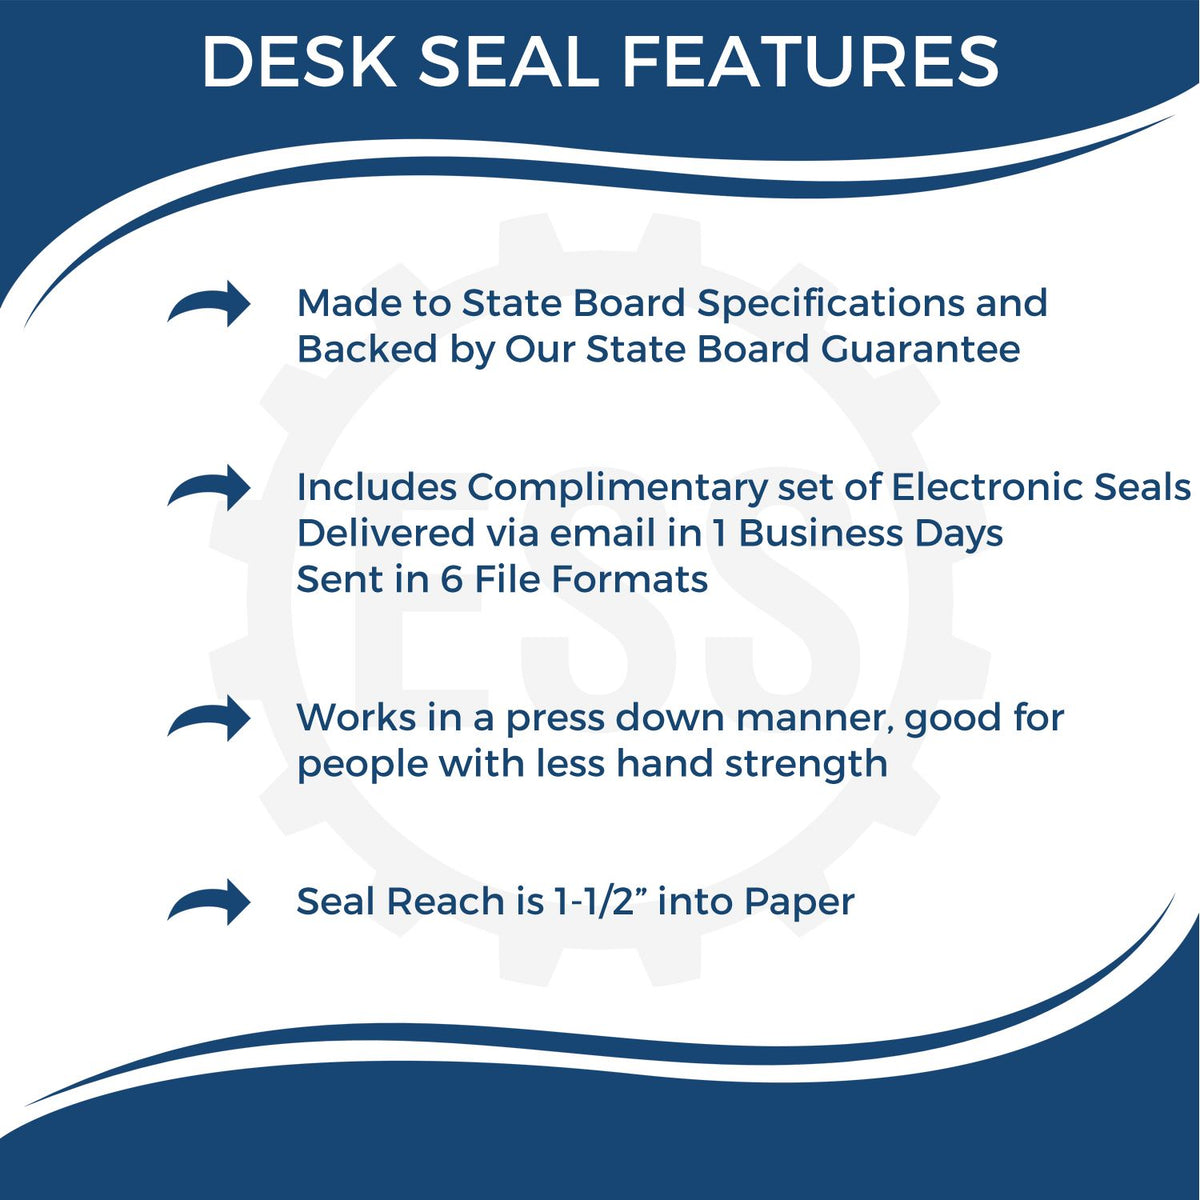 A picture of an infographic highlighting the selling points for the Maine Geologist Desk Seal